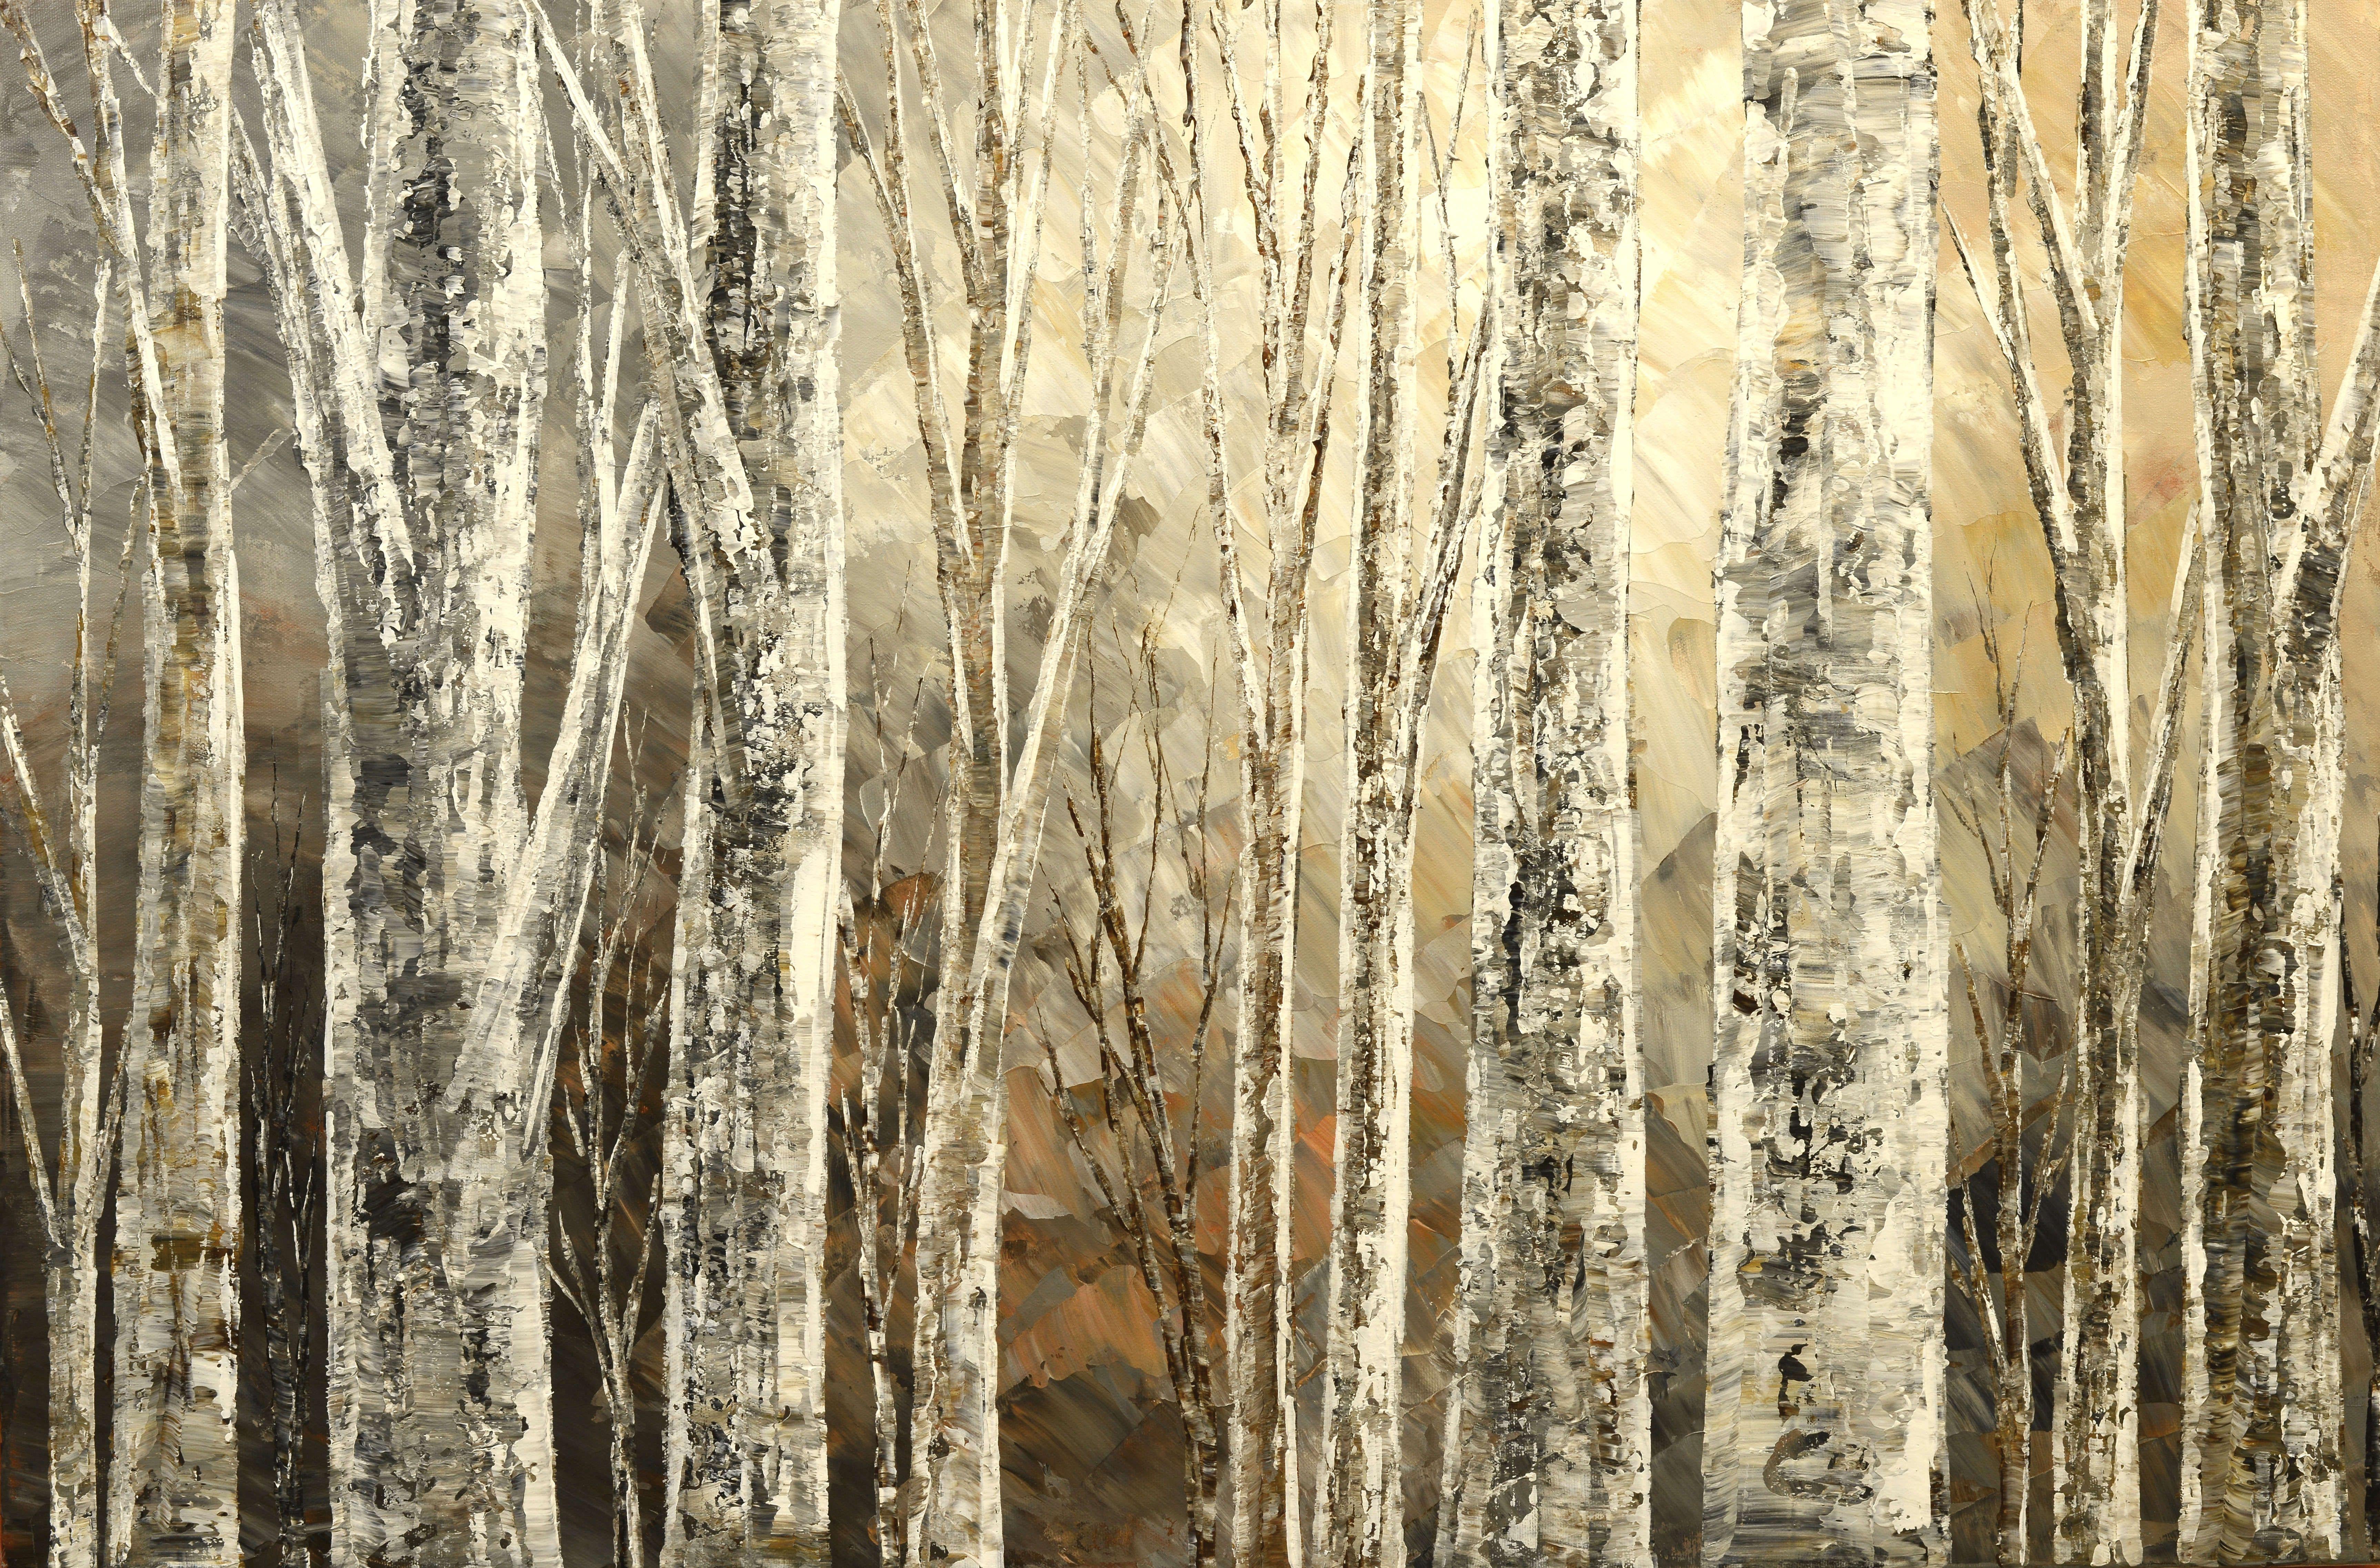 This is an original palette knife forest painting.   Size: 24" x 36" x 1" Sides of the canvas are painted grey.   You will receive it "ready to hang", with a wire attached on the back.   Protective coat of satin varnish applied.   The painting is